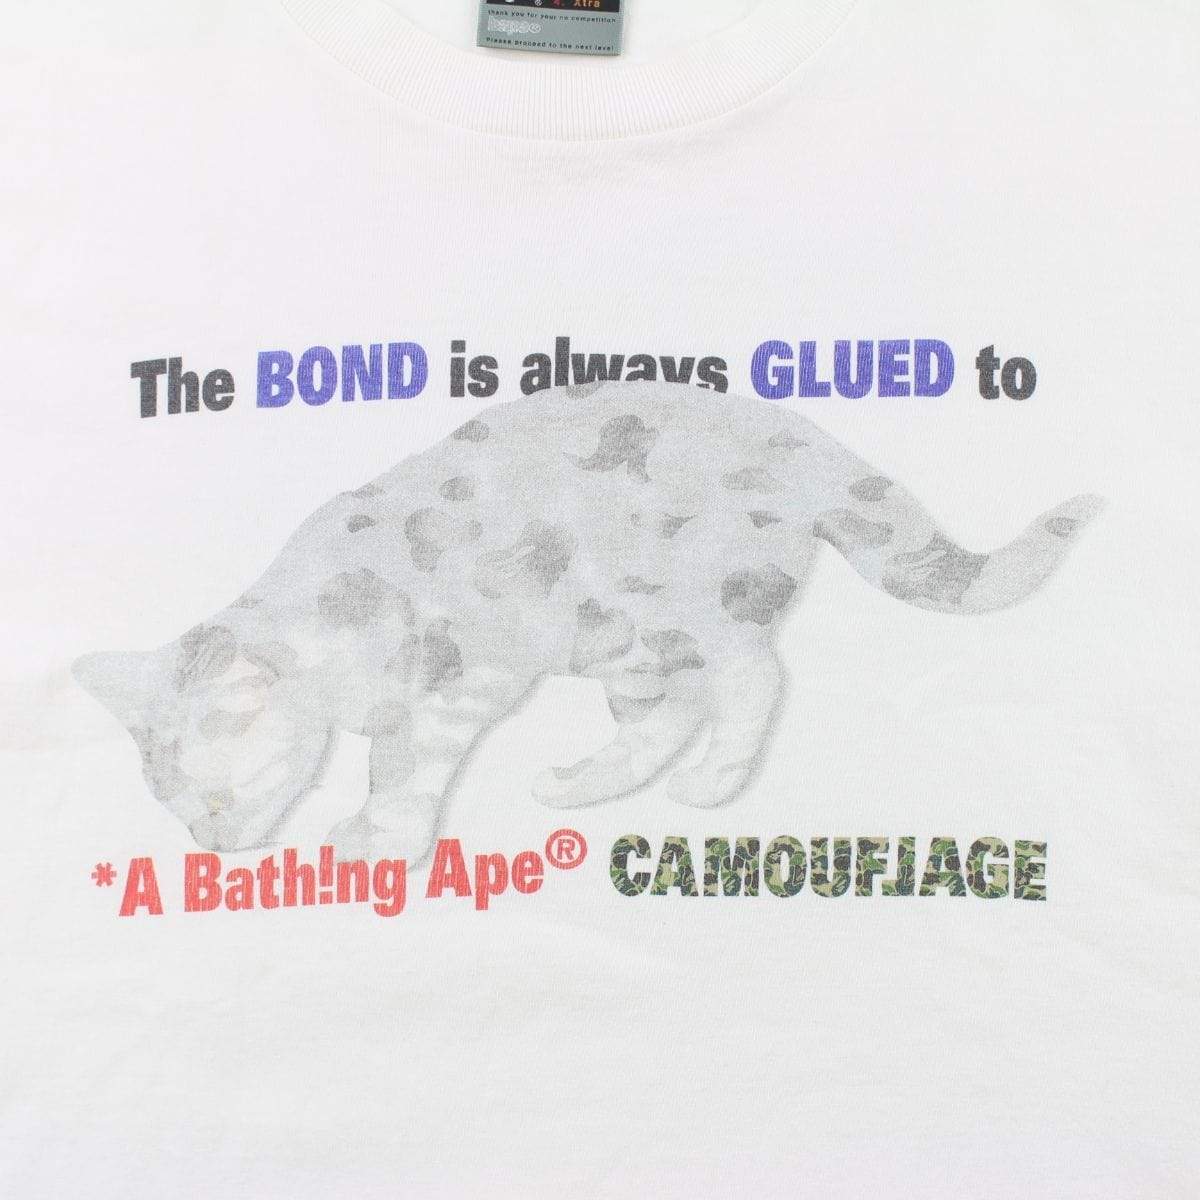 Bape The Bond Cat Camouflage Tee White - SaruGeneral